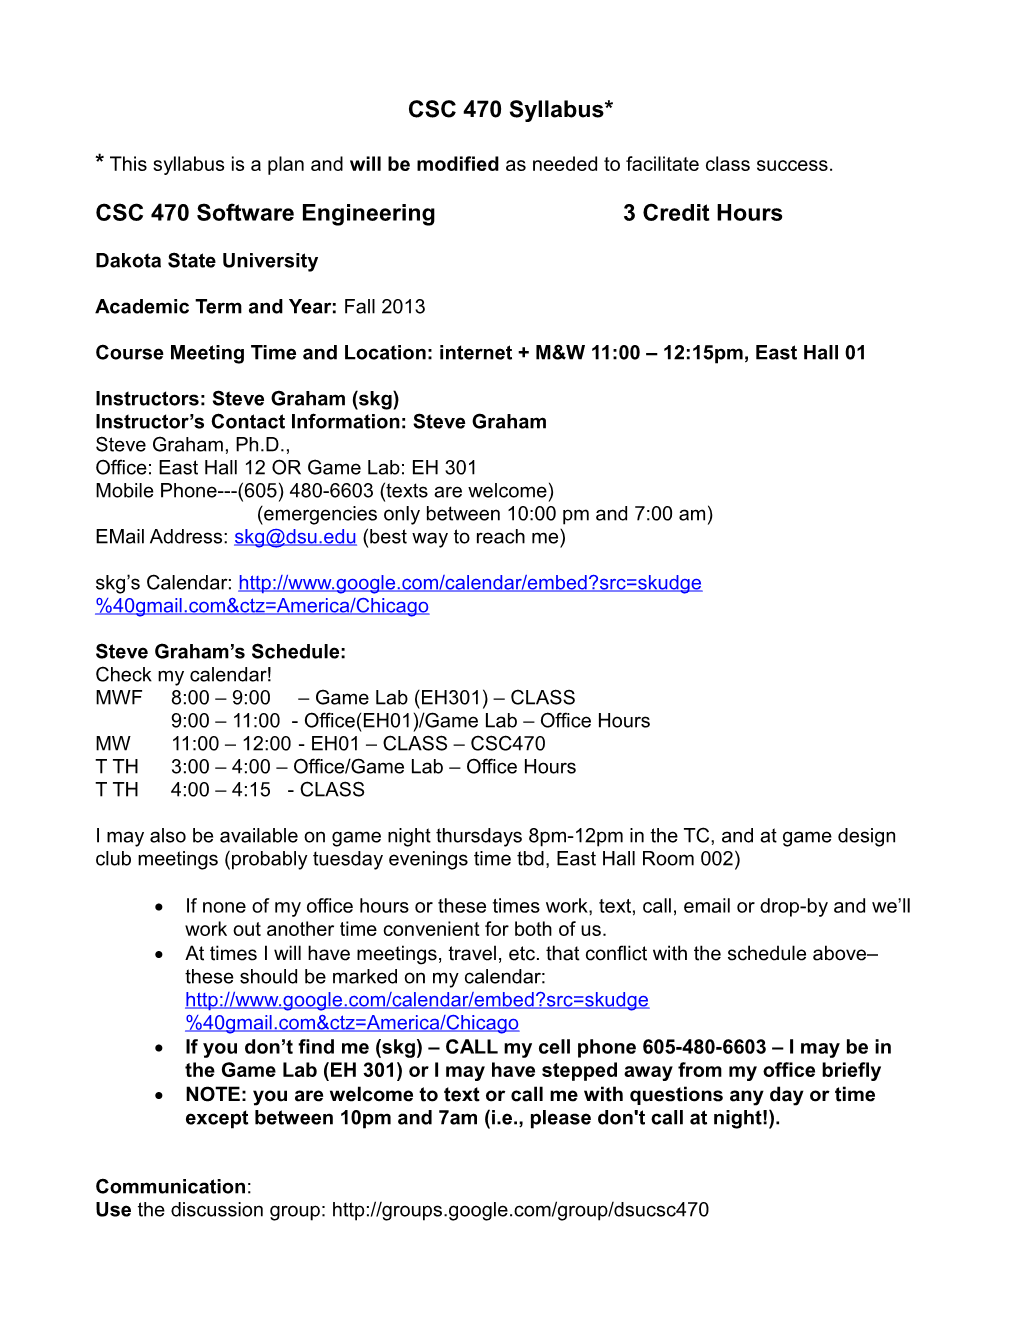 CSC 470 Software Engineering 3 Credit Hours